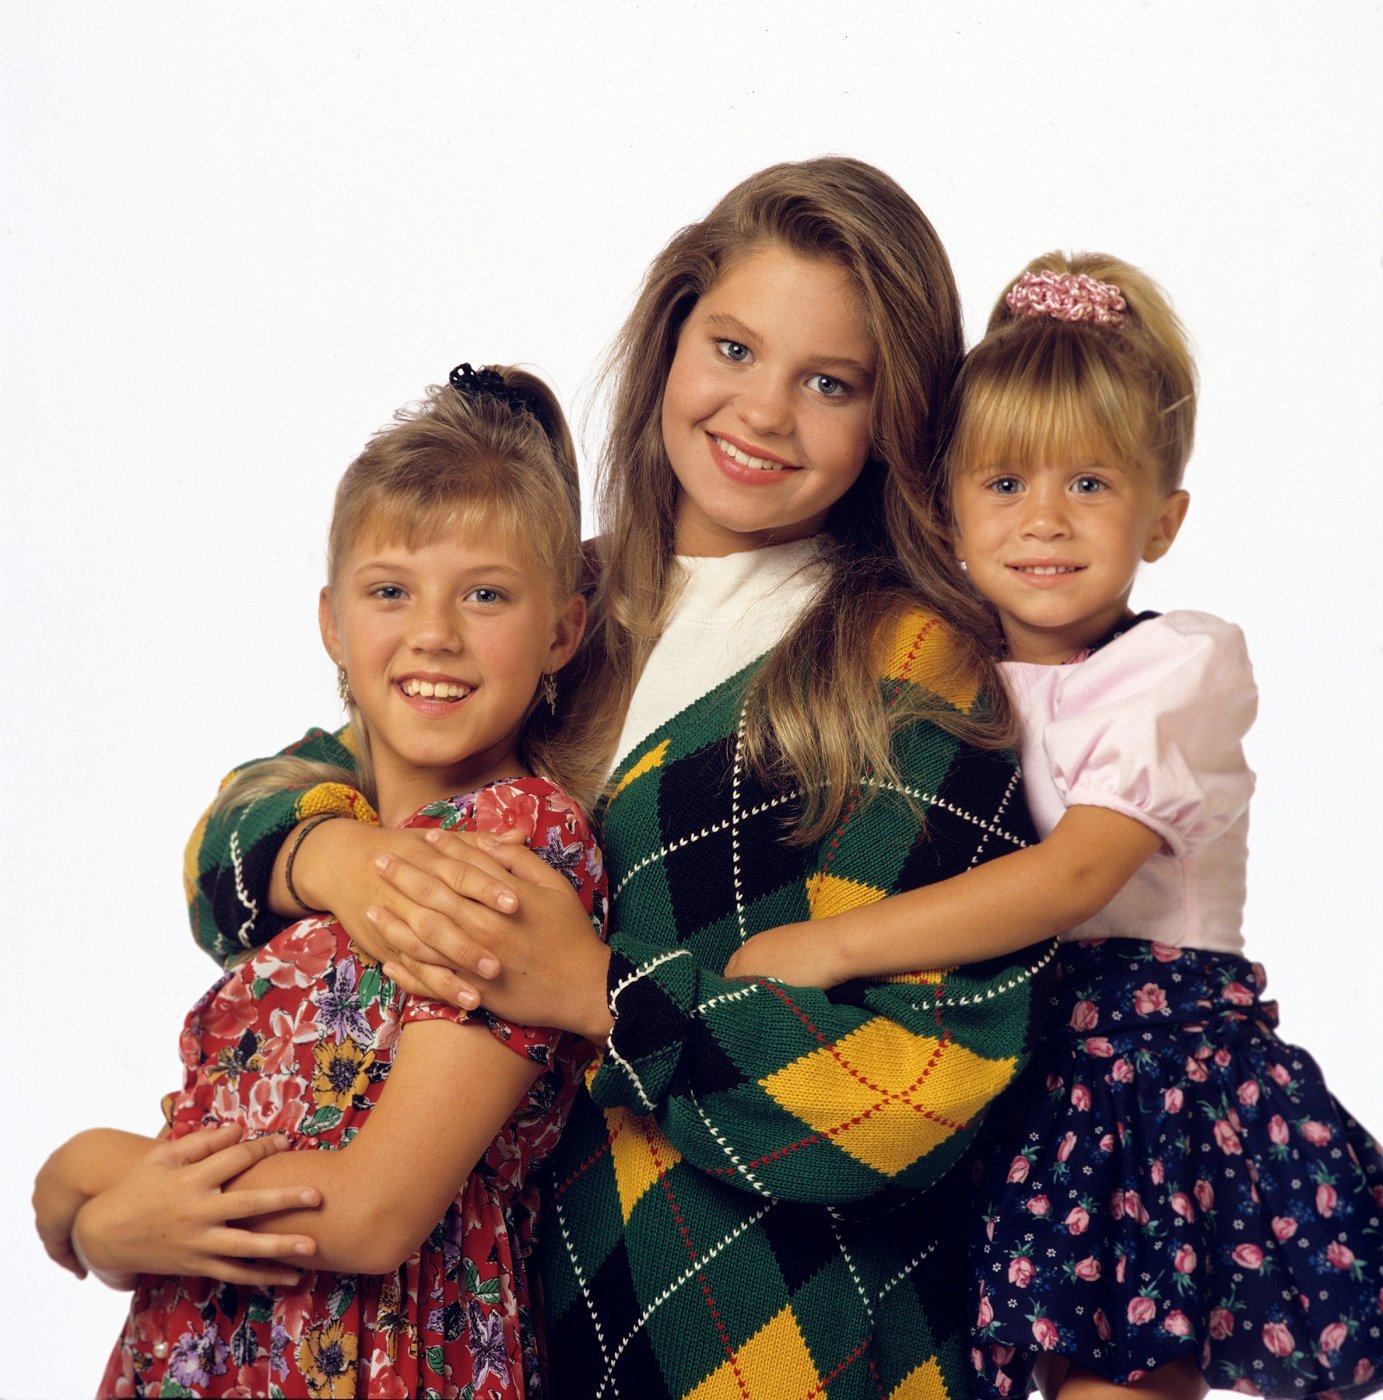 Jodie Sweetin, Candace Cameron and Ashley Olsen pose for a promotional photo for 'FulL House'